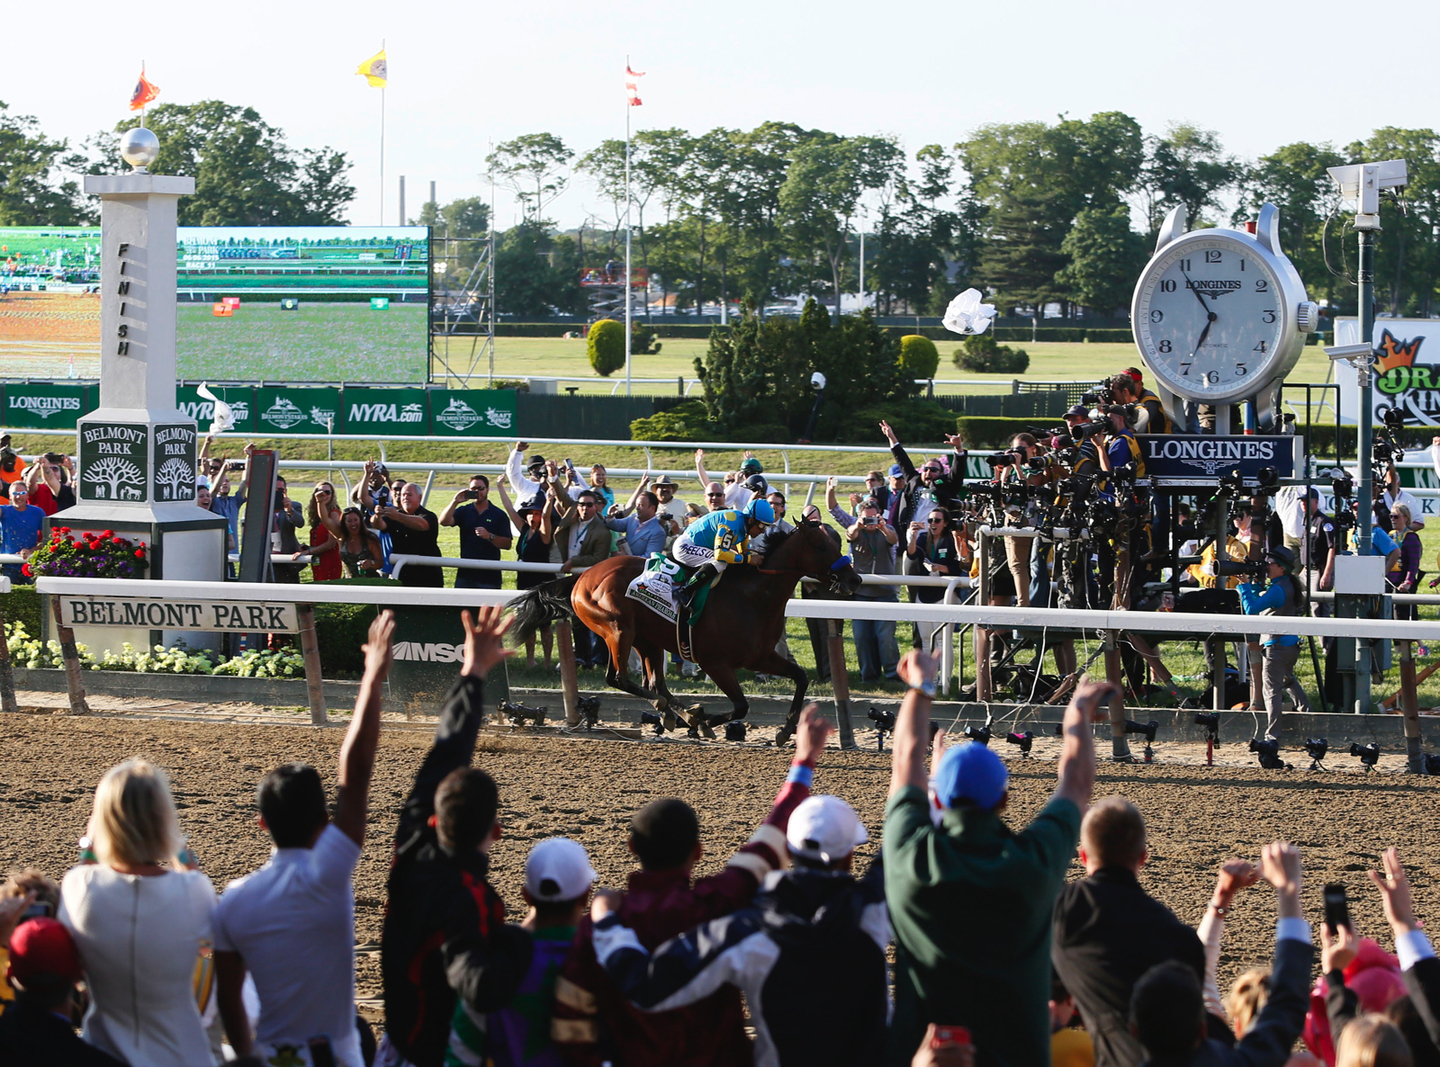 American Pharoah Wins at Belmont to Complete the Triple Crown